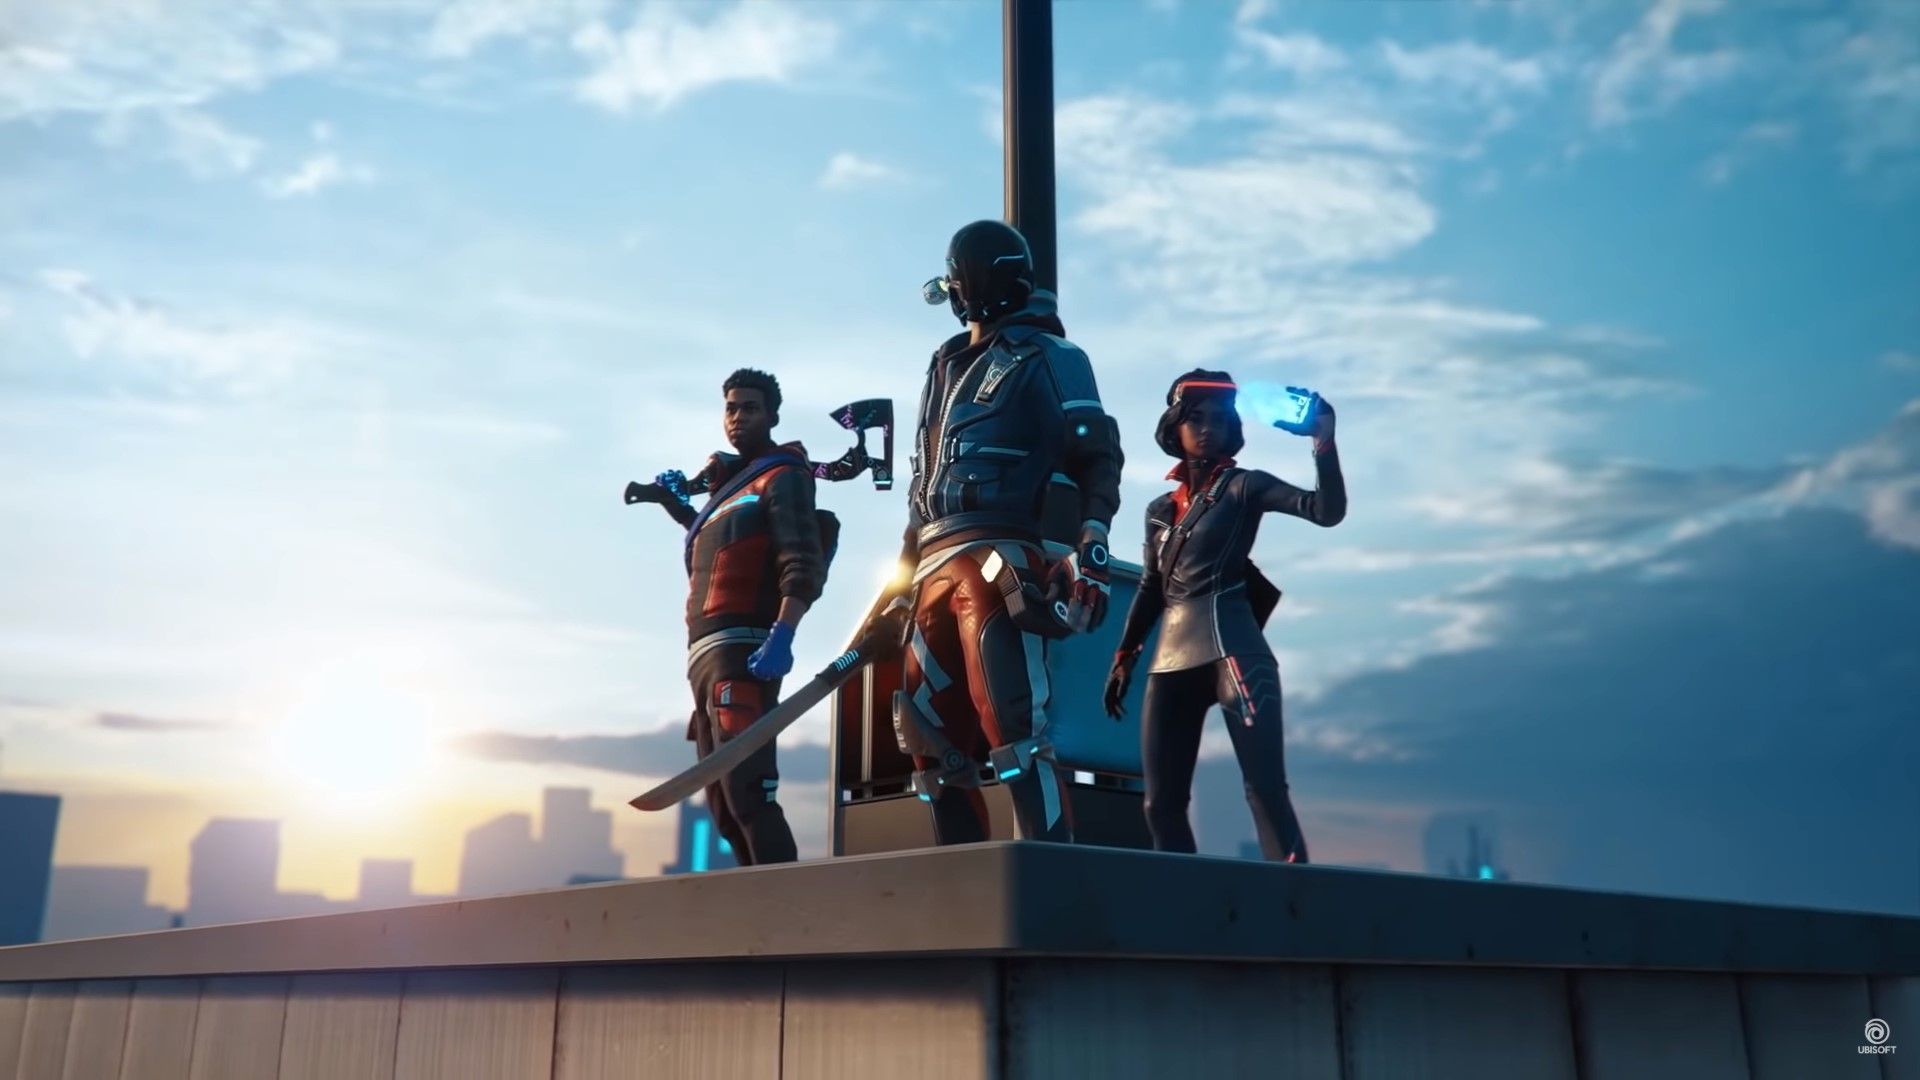 Ubisoft joins the battle royale fray with Hyper Scape